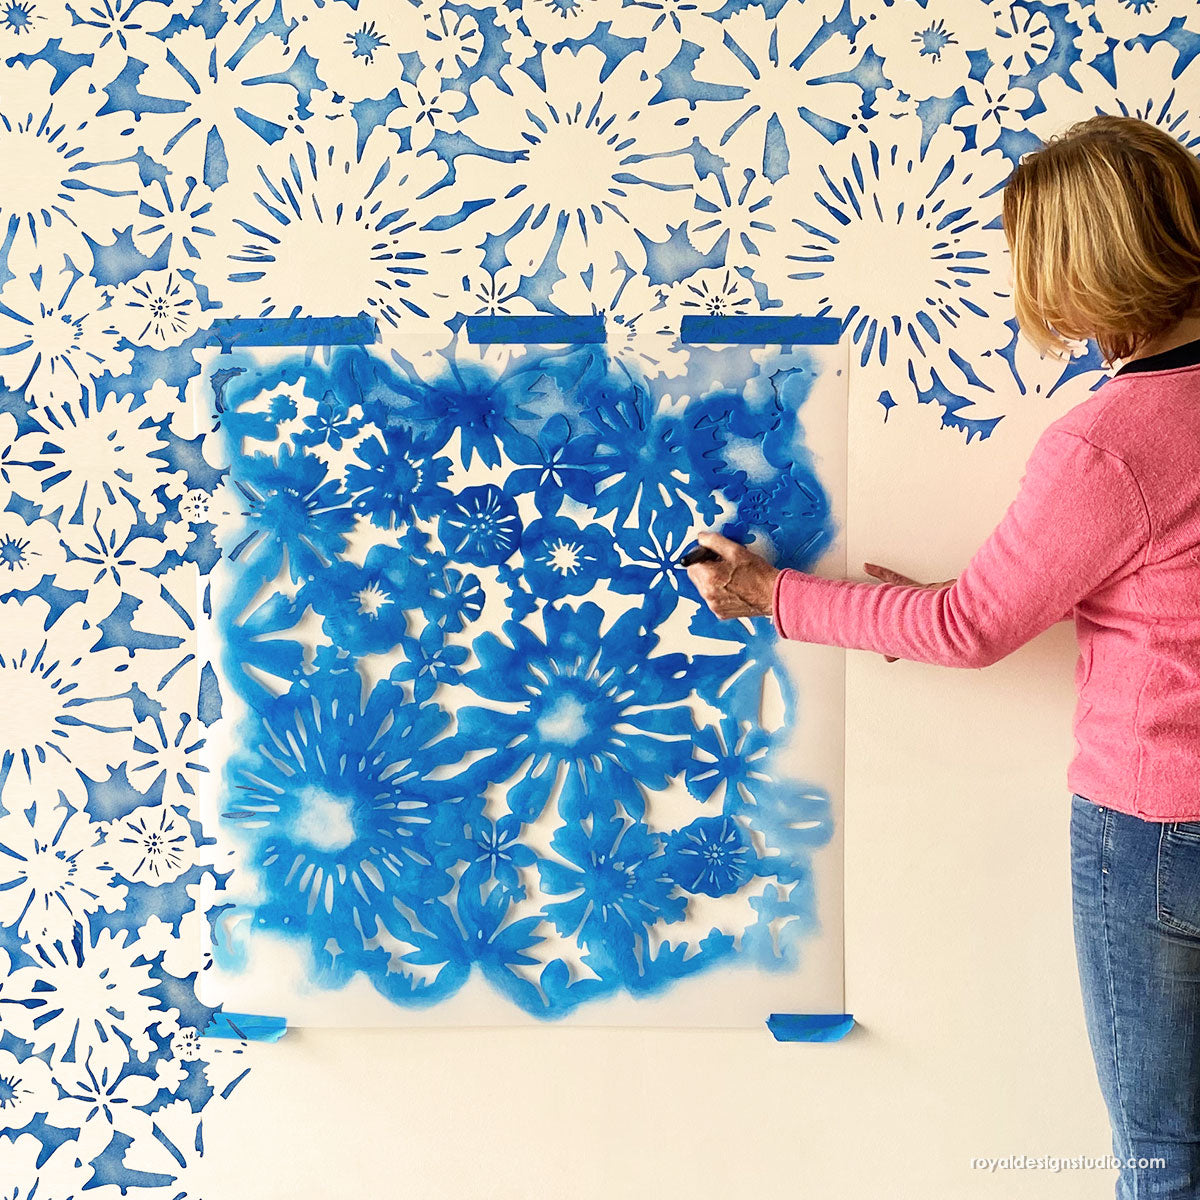 Brush up on Wall Stenciling: How to Stencil a Watercolor Look